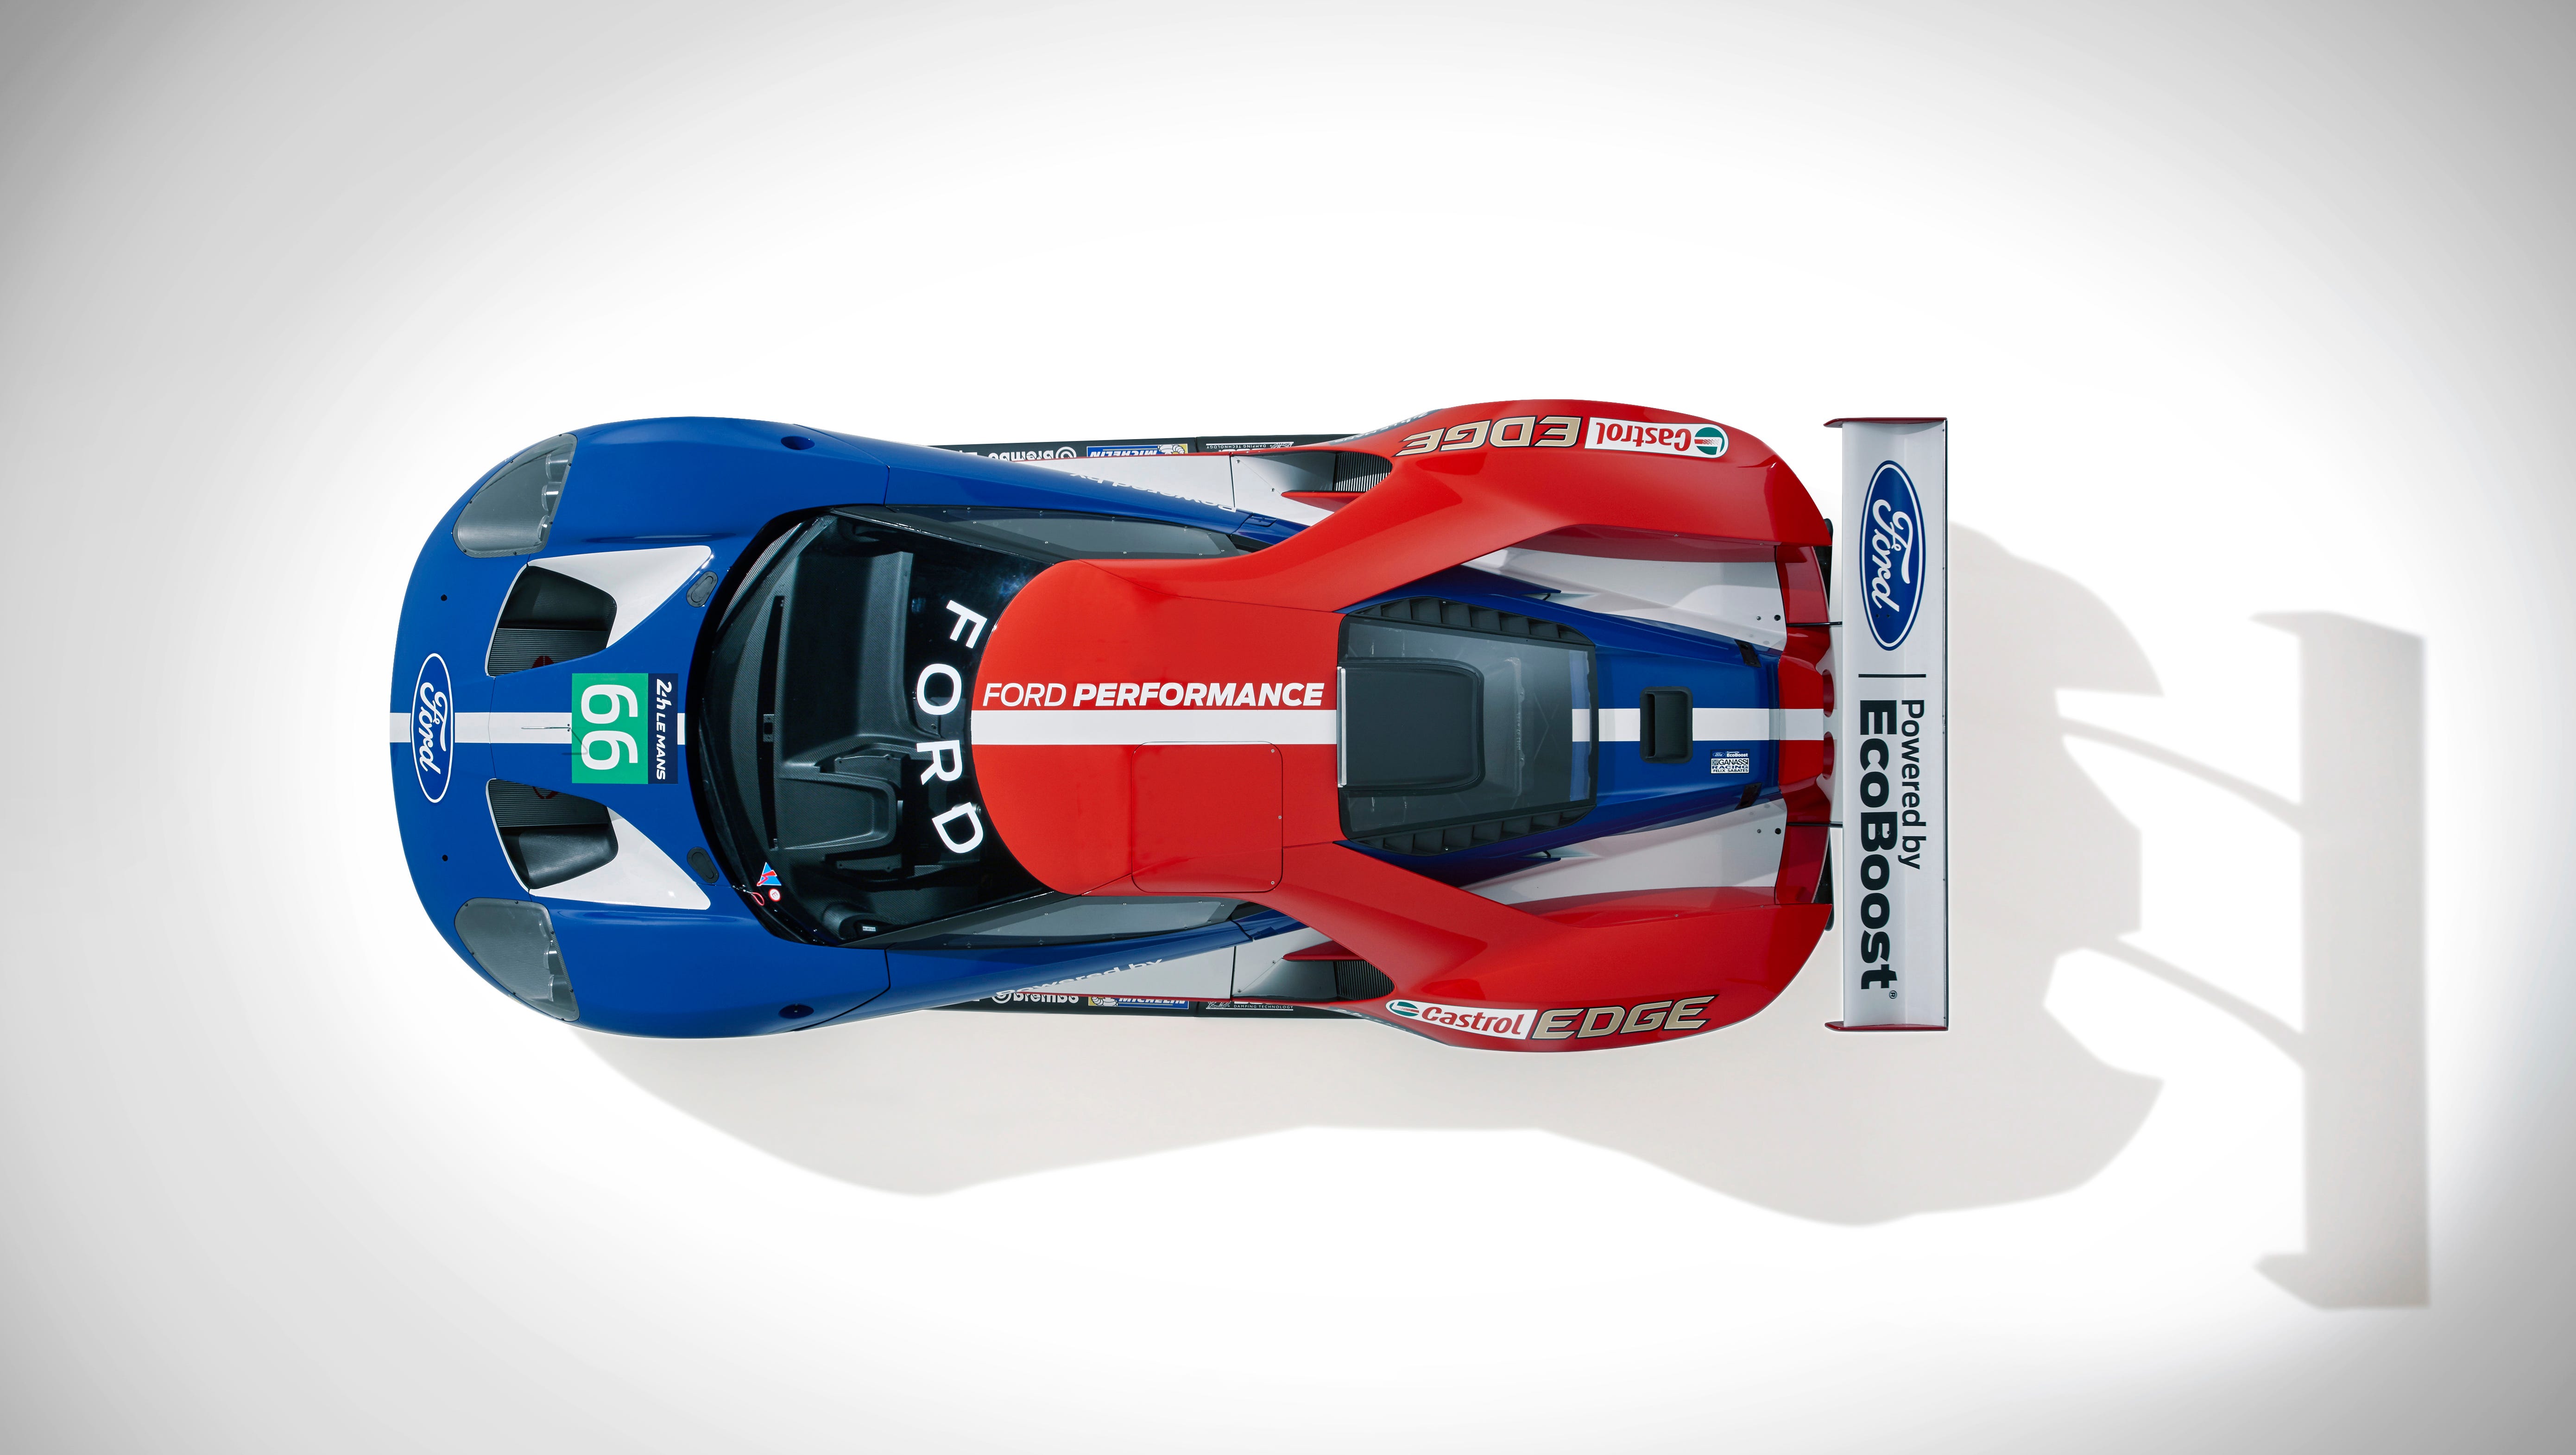 The new Ford GT race car will be campaigned by Chip Ganassi Racing, and will compete in June in the 24 Hours of Le Mans in France.